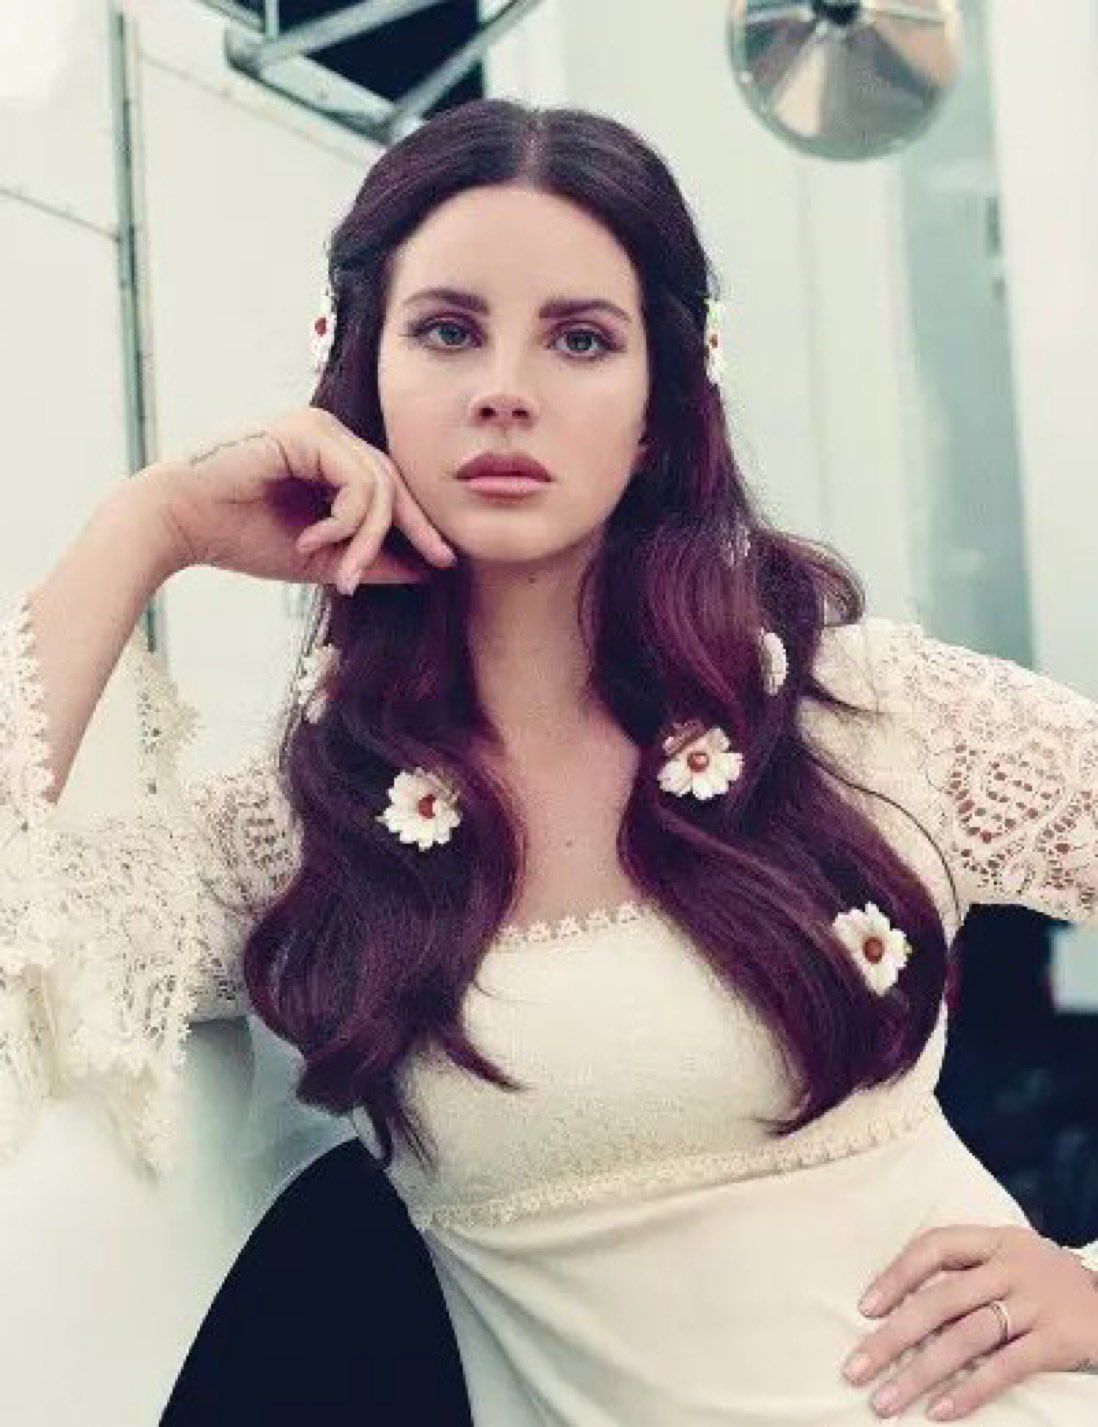 what's lana del rey's most underrated song, GO